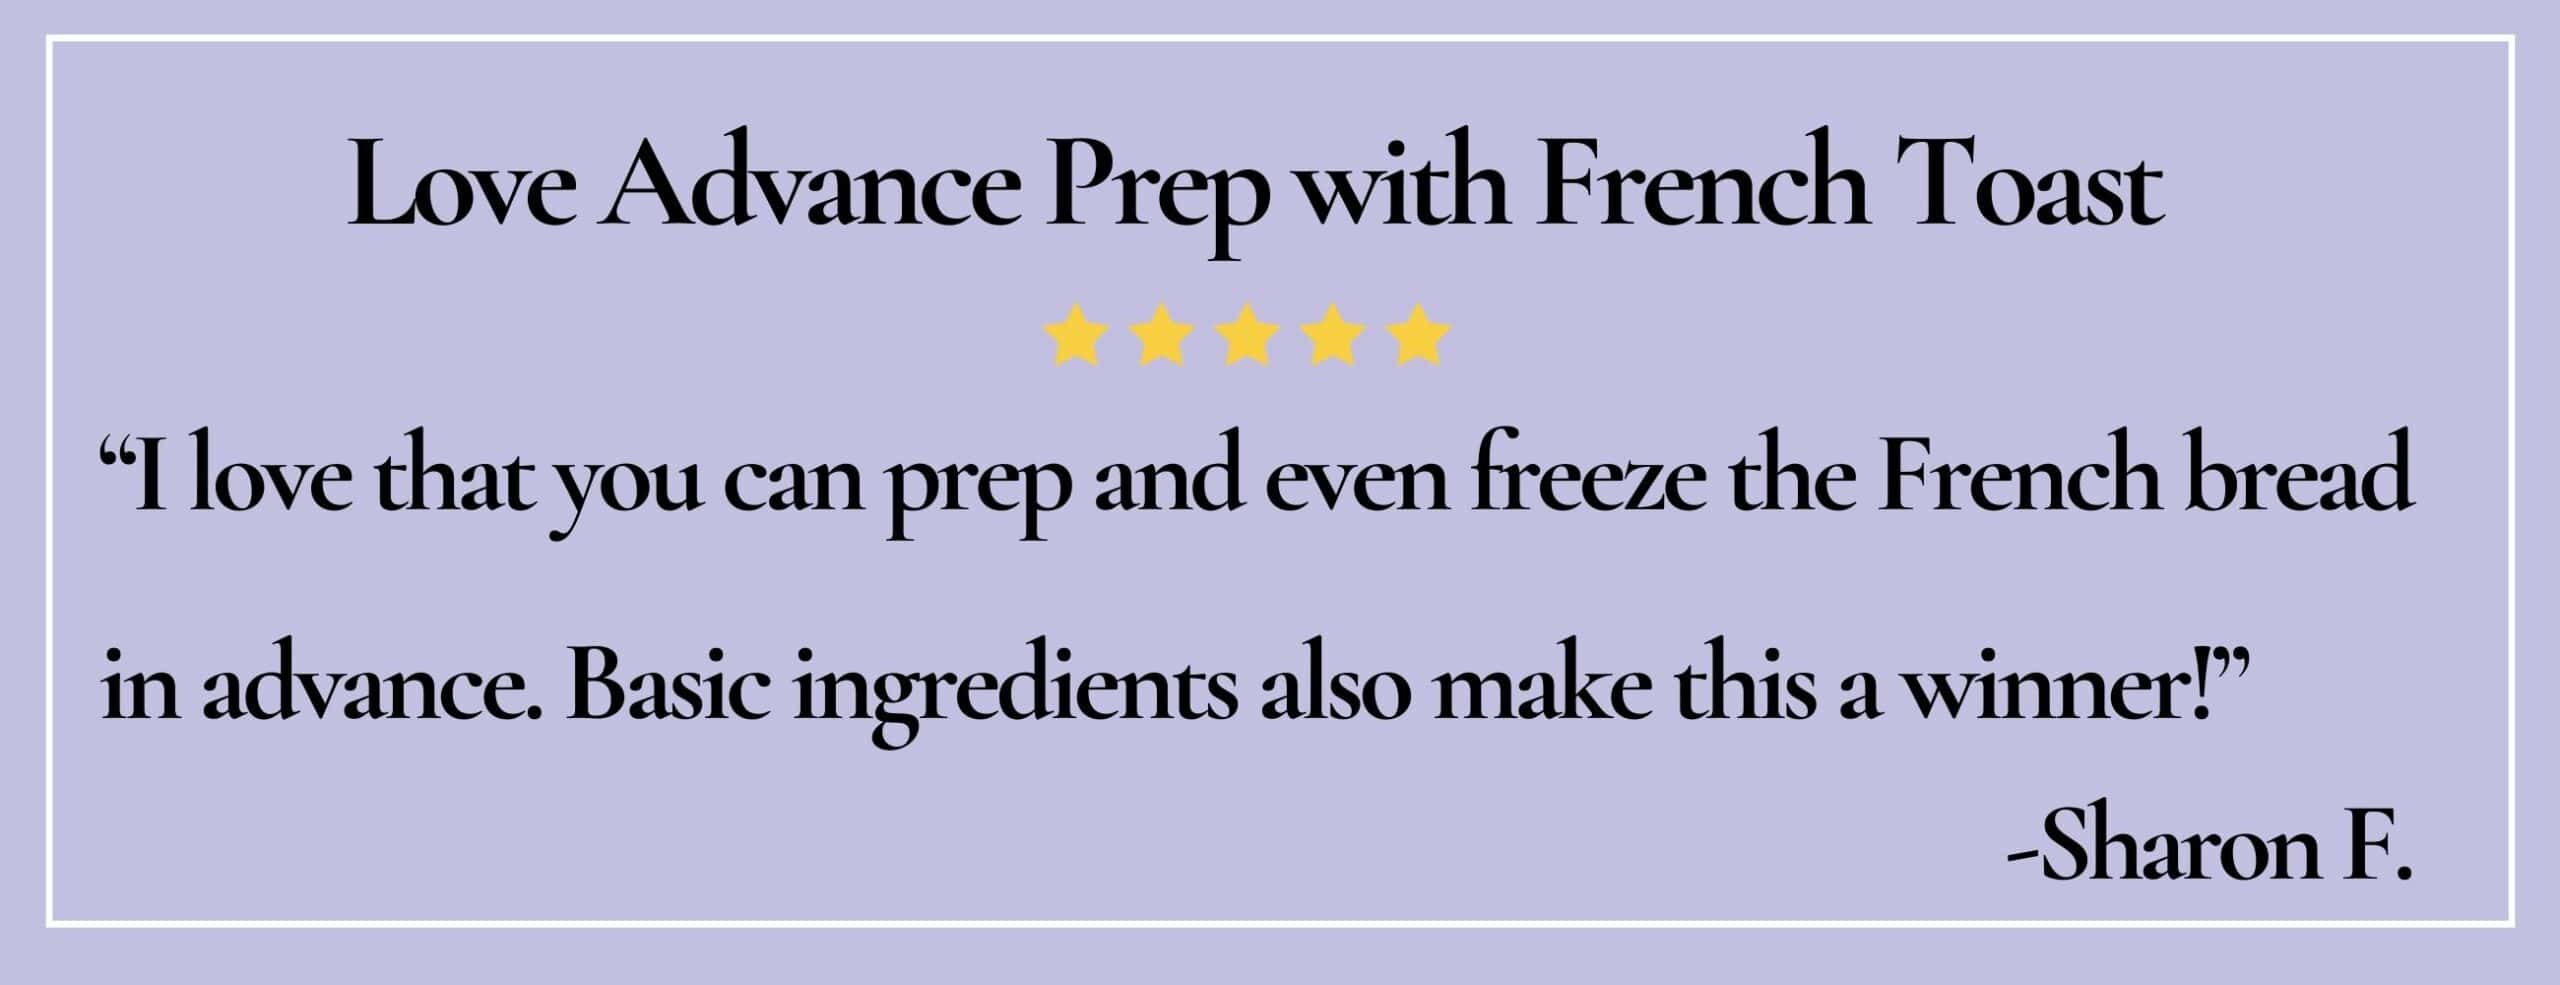 Text box with paraphrase: Love that you can prep and even freeze the French bread in advance -Sharon F